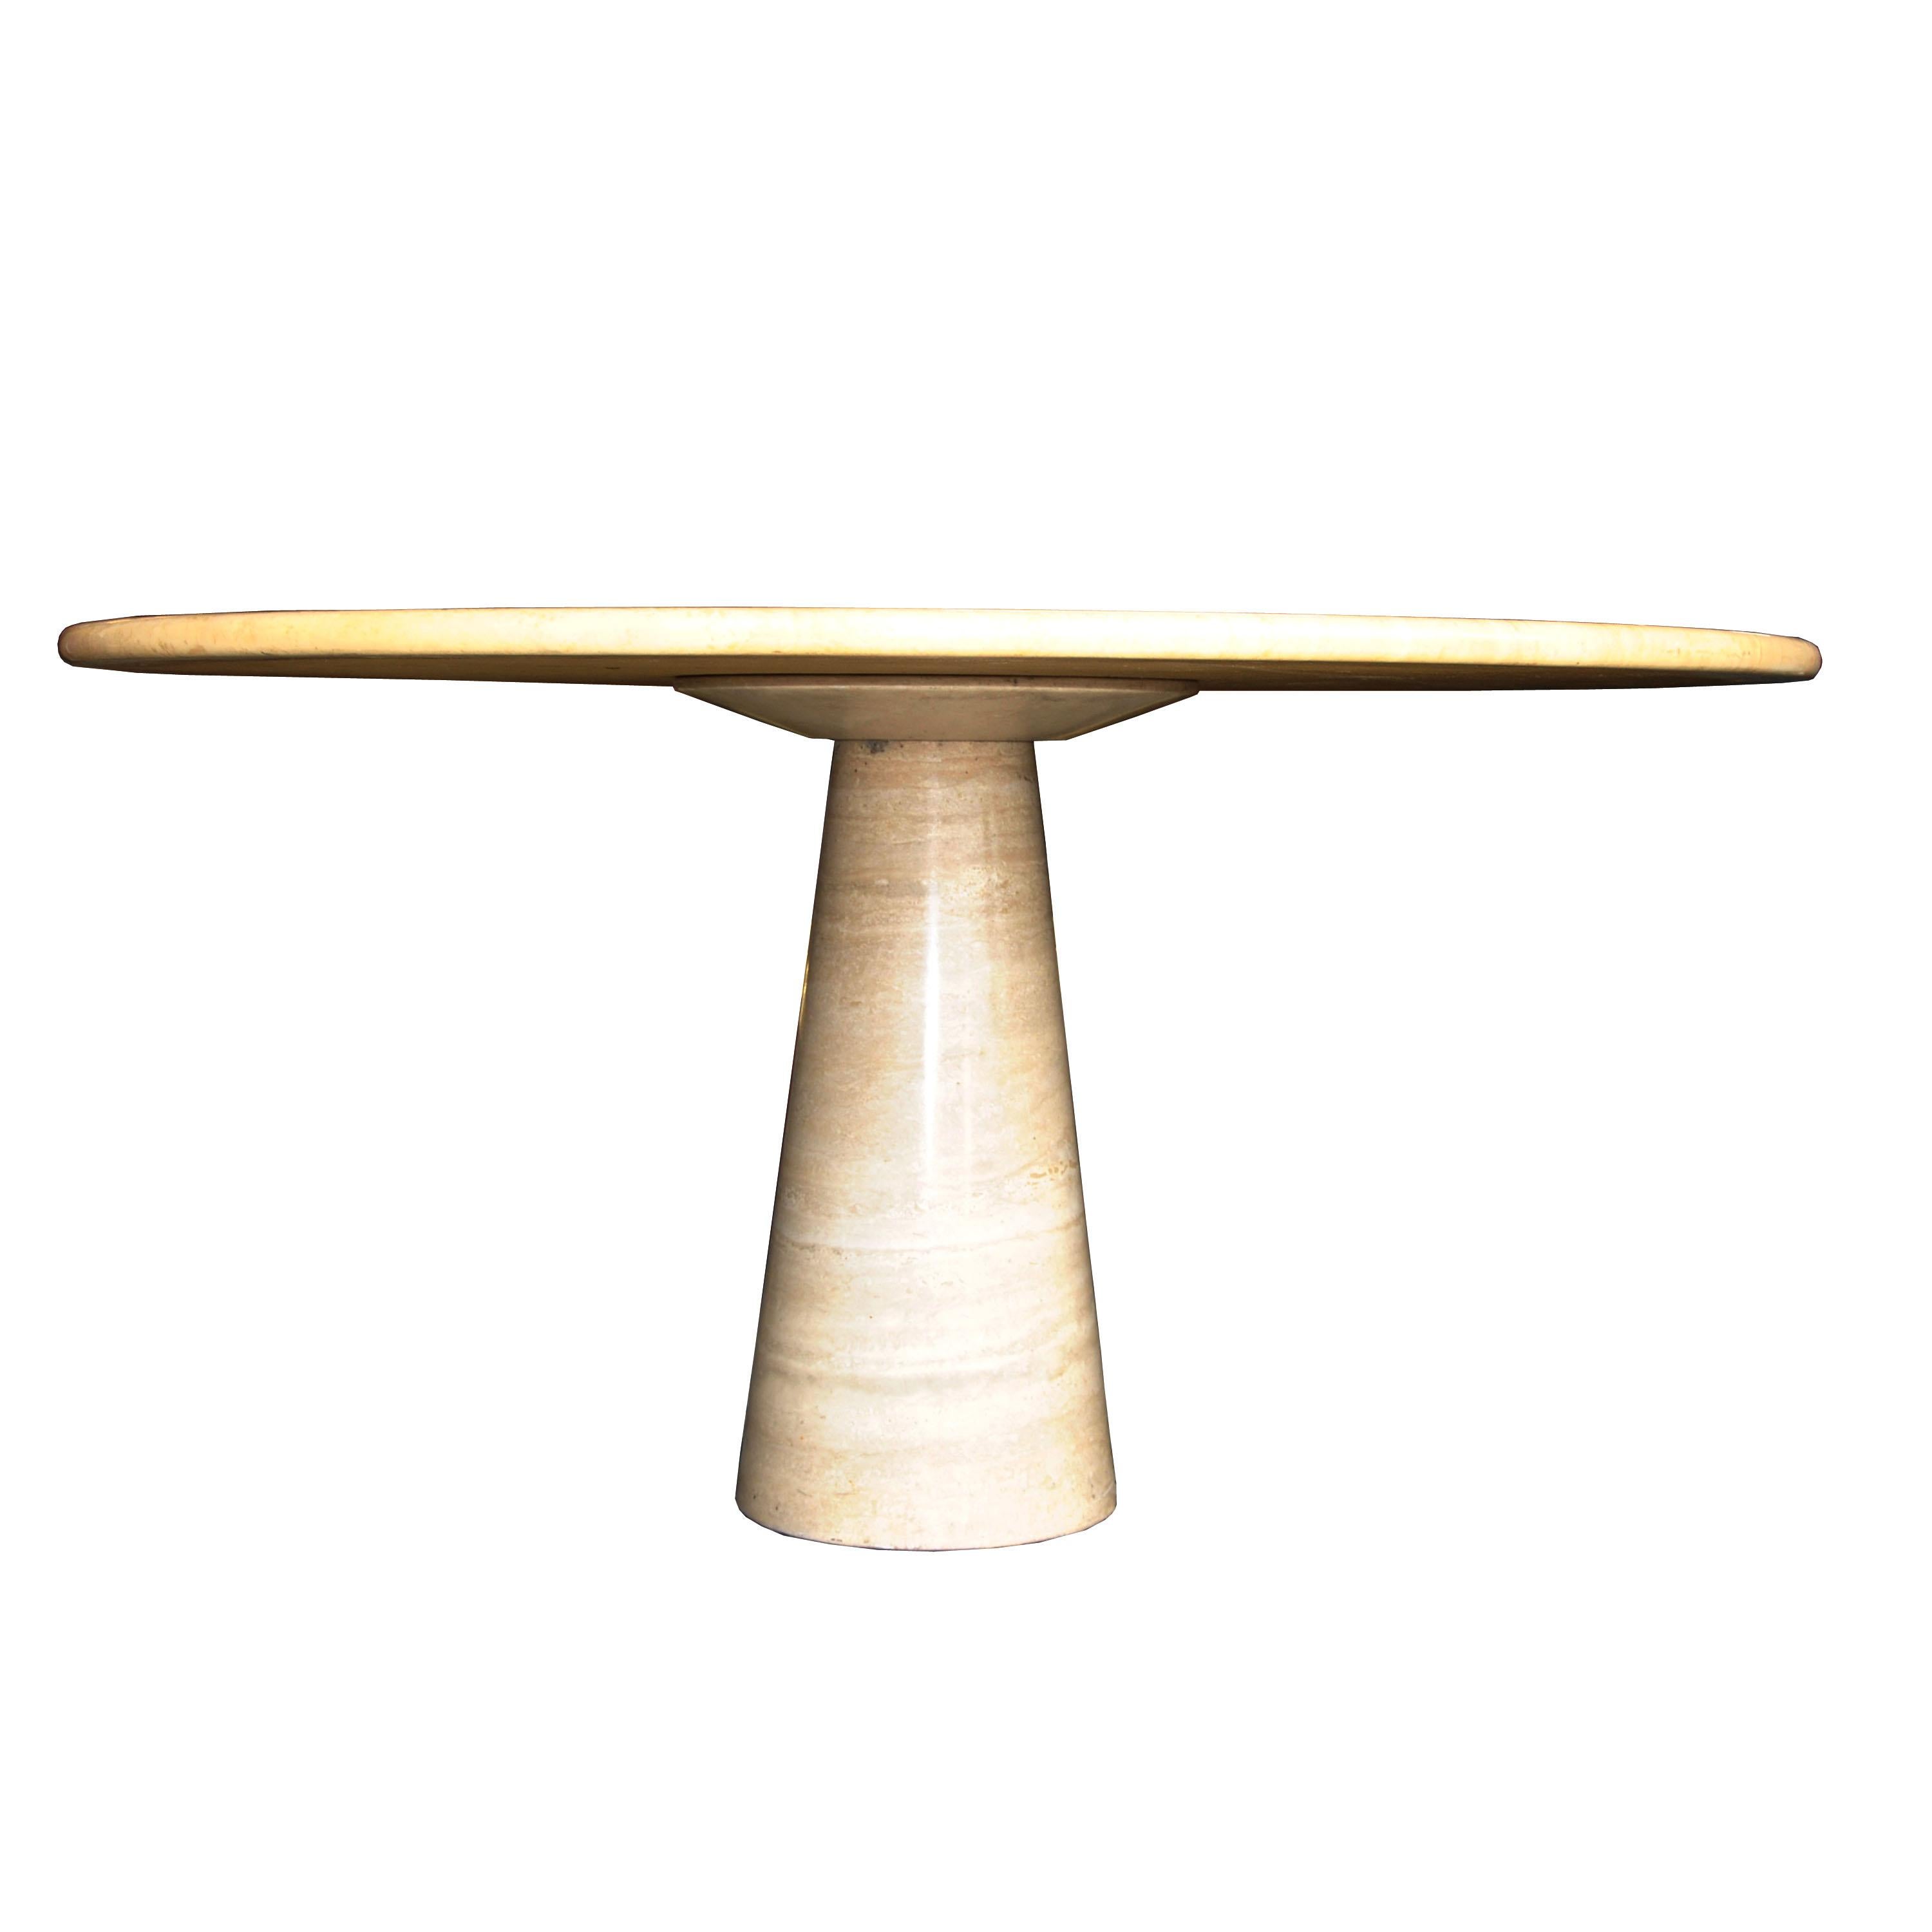 Mid-Century Modern Roche Bobois Polished Travertine Dining Table